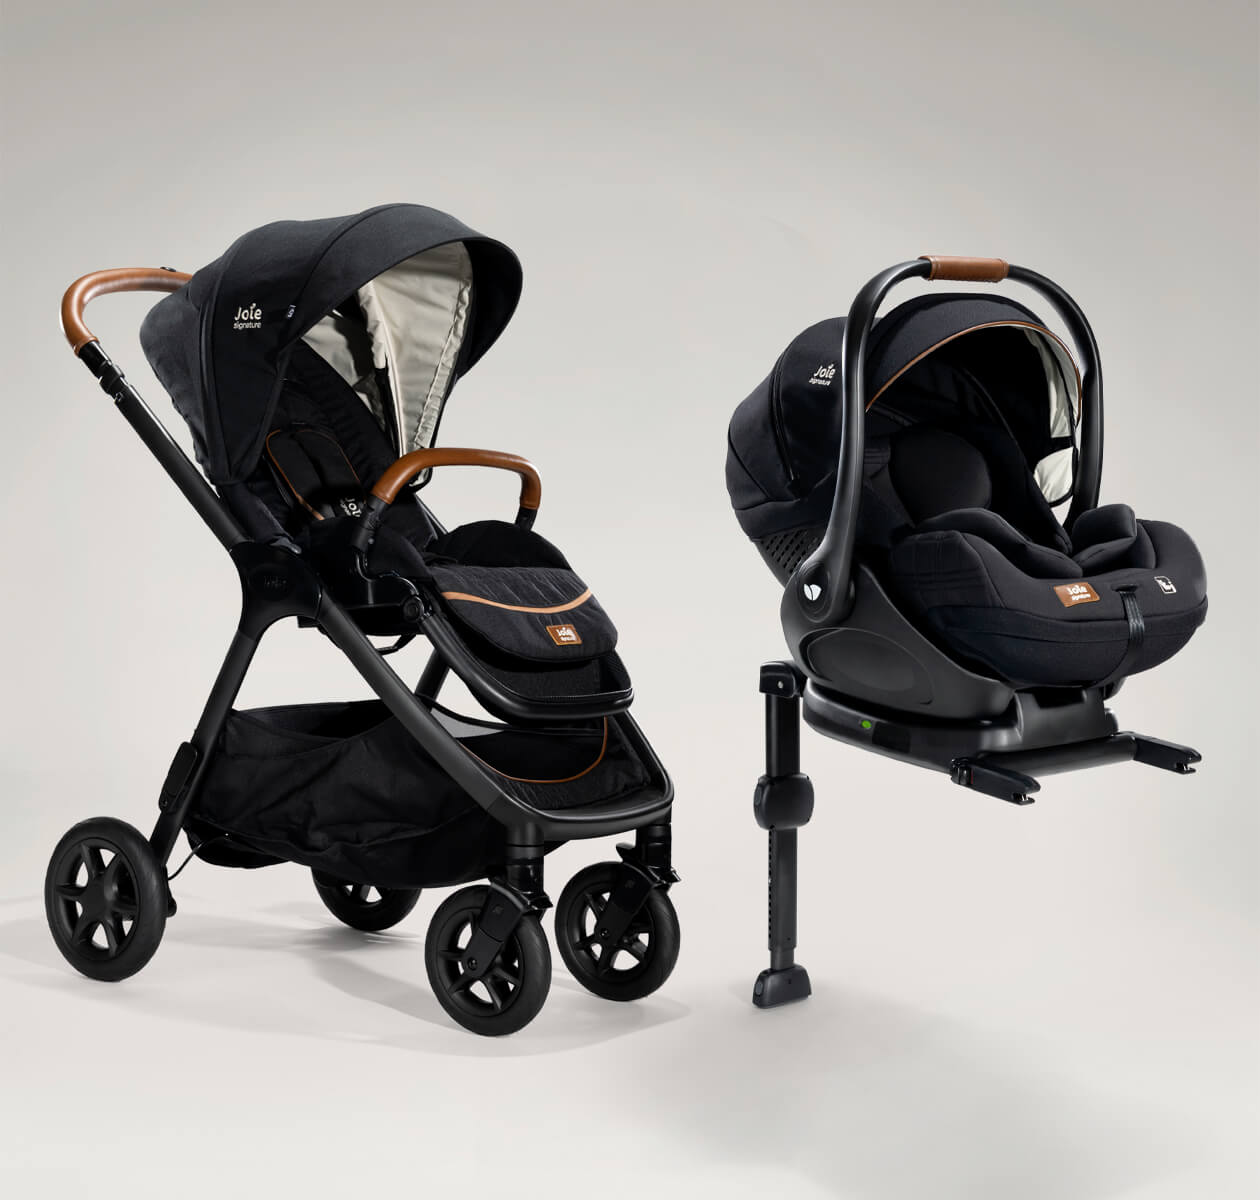  Joie finiti pram in black at an angle.